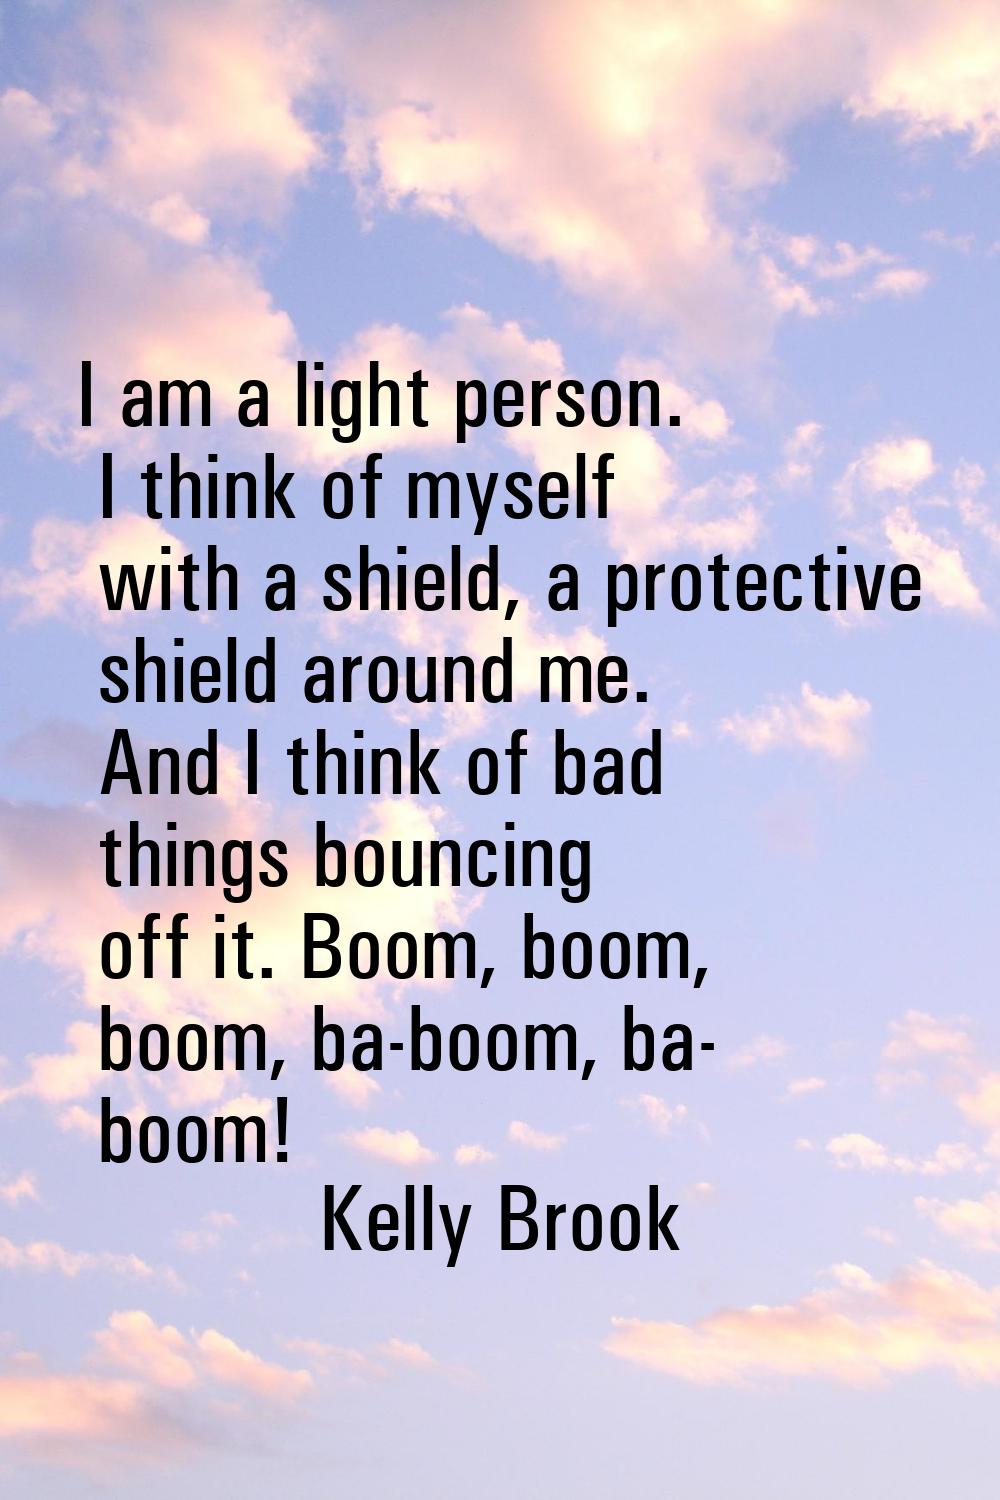 I am a light person. I think of myself with a shield, a protective shield around me. And I think of